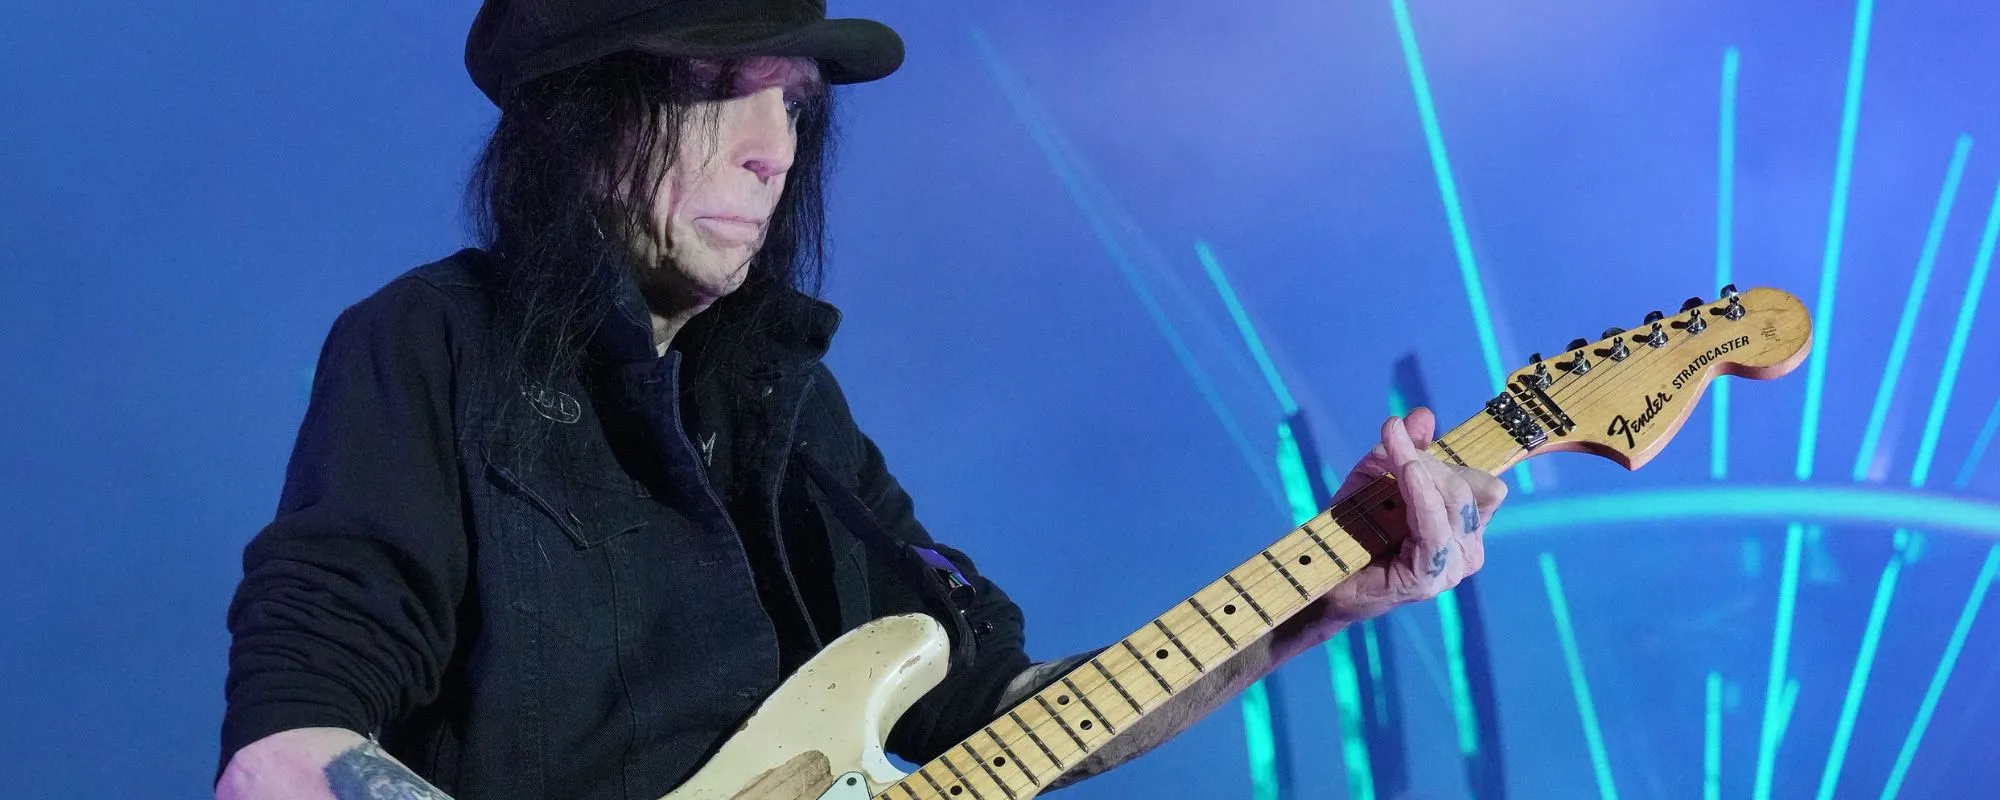 5 Songs You Didn’t Know Mick Mars Wrote for Mötley Crüe